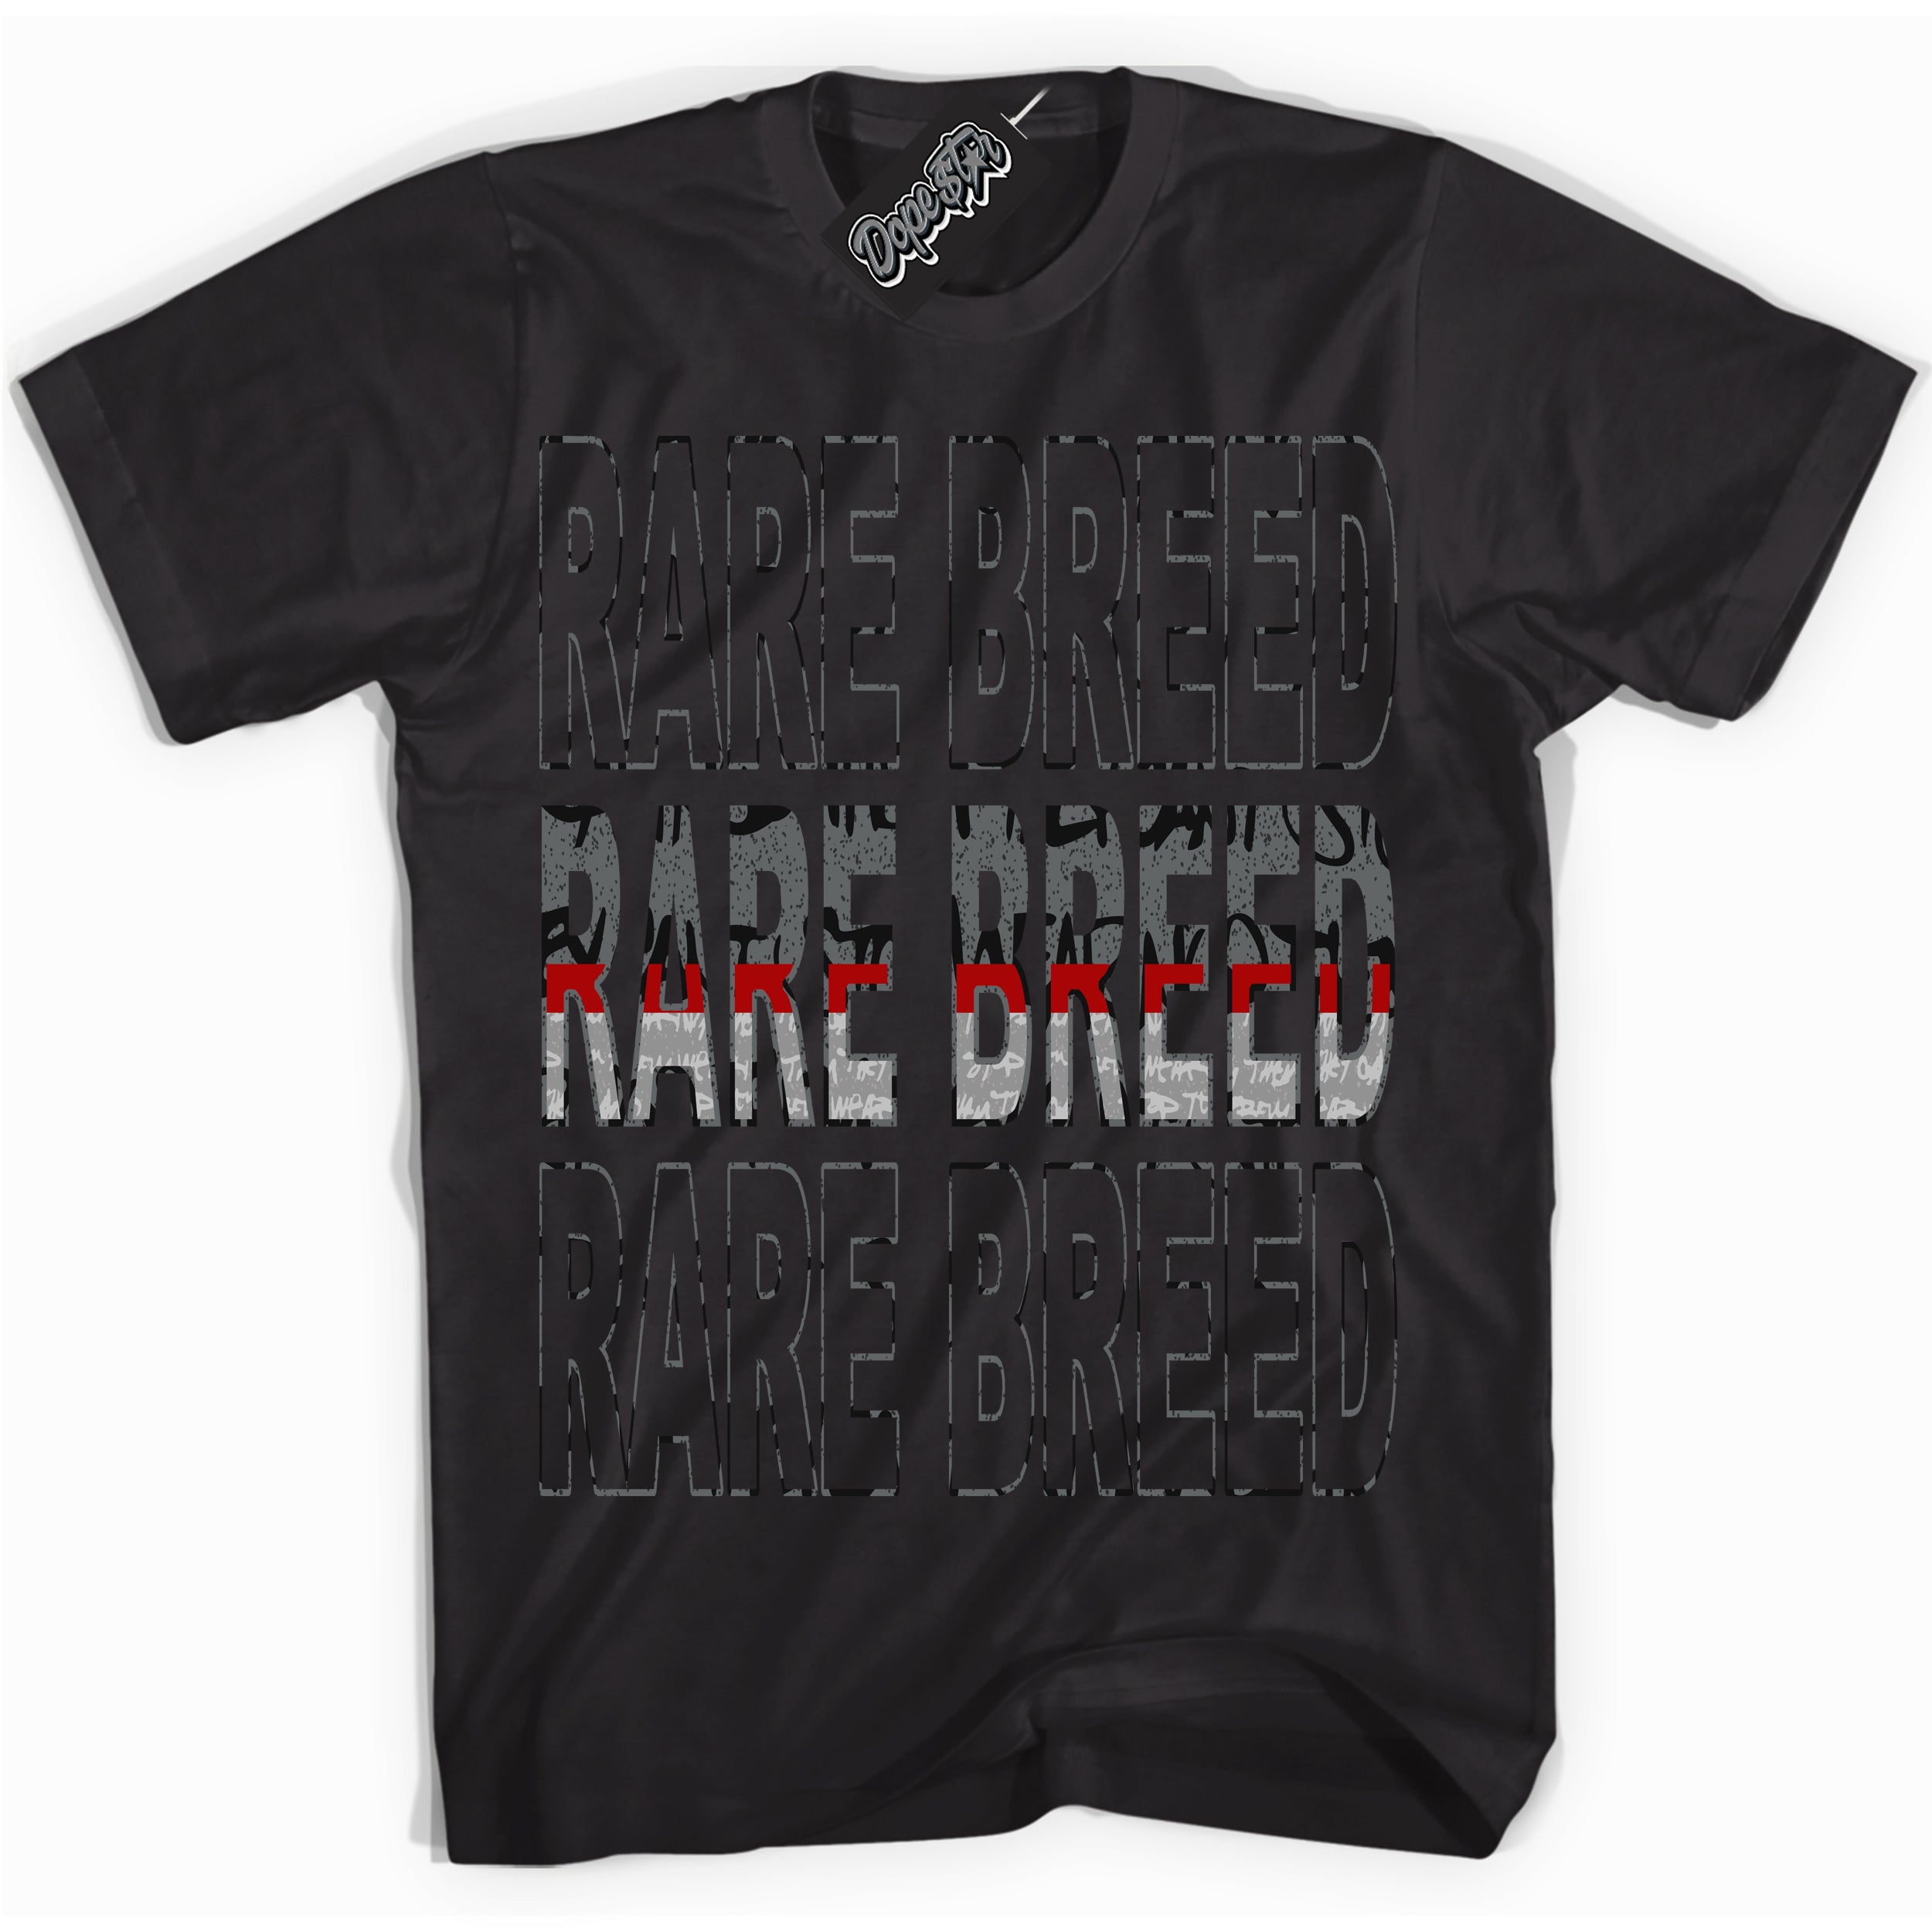 Cool Black Shirt with “ Rare Breed ” design that perfectly matches Rebellionaire 1s Sneakers.